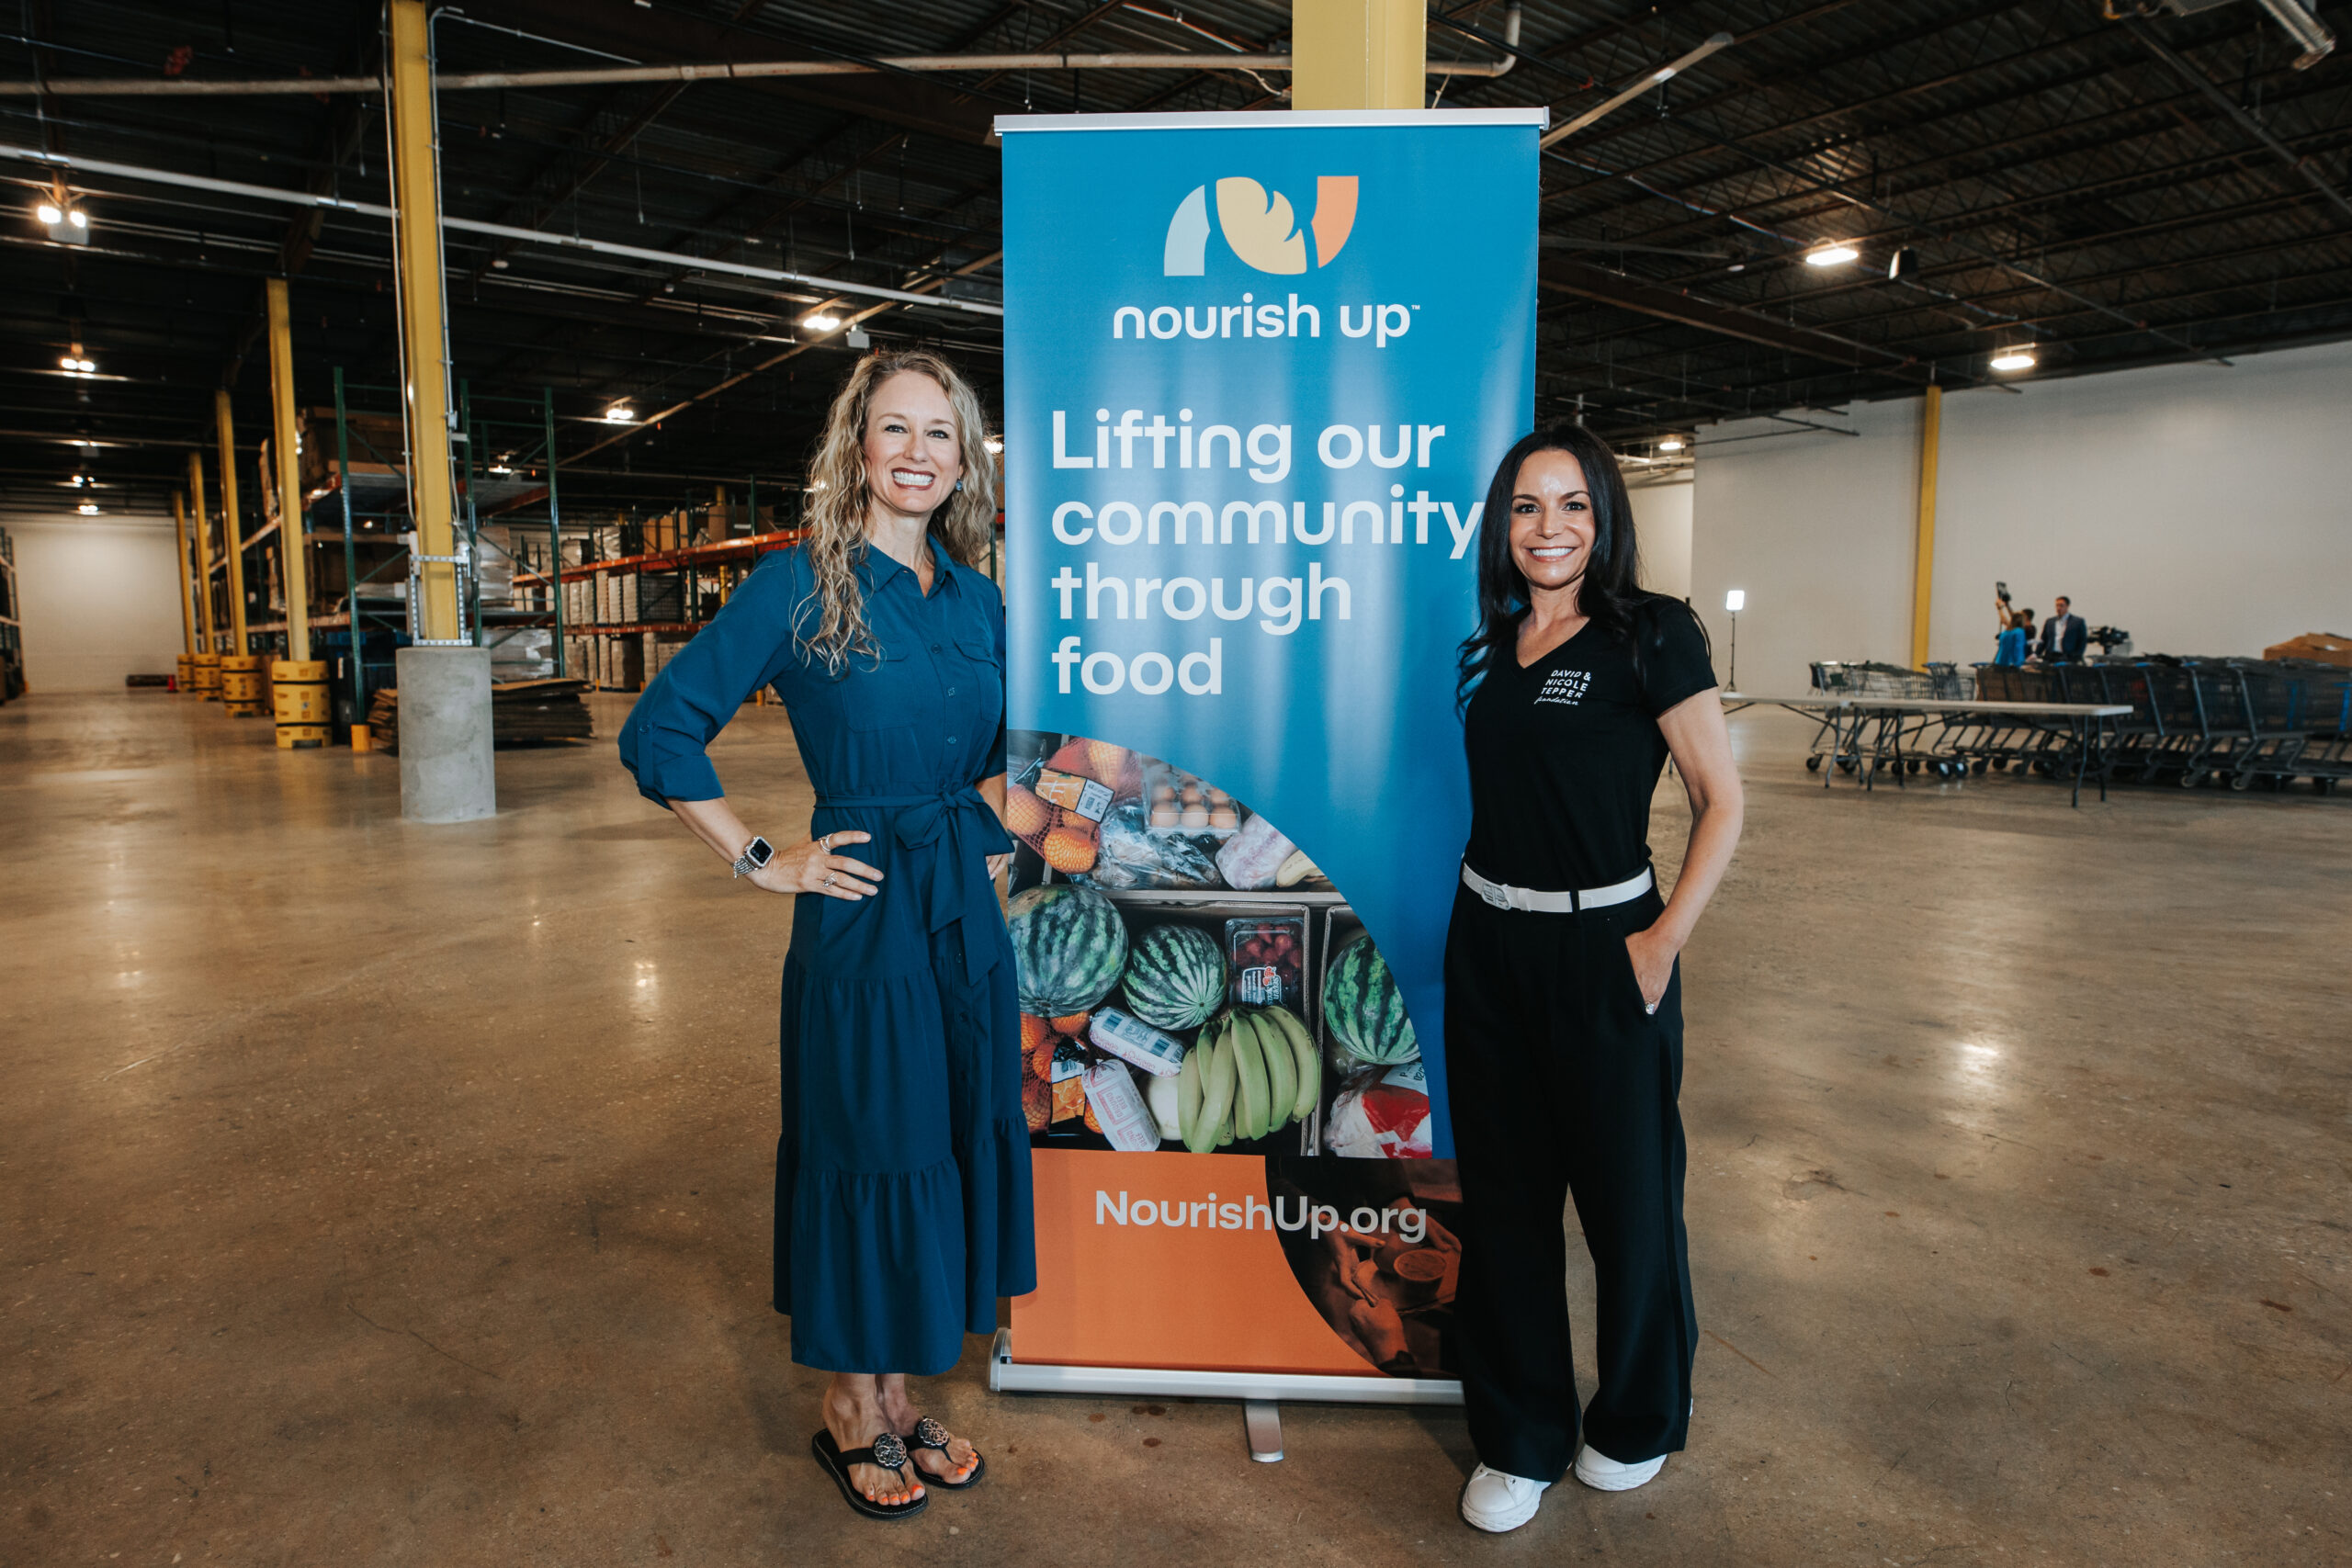 Nicole-Tepper-and-Tina-Postel-at-Nourish-Ups-Hunger-Hub-6.11.24-—-credit-Kenny-Richmond-of-Tepper-Sports-Entertainment-5